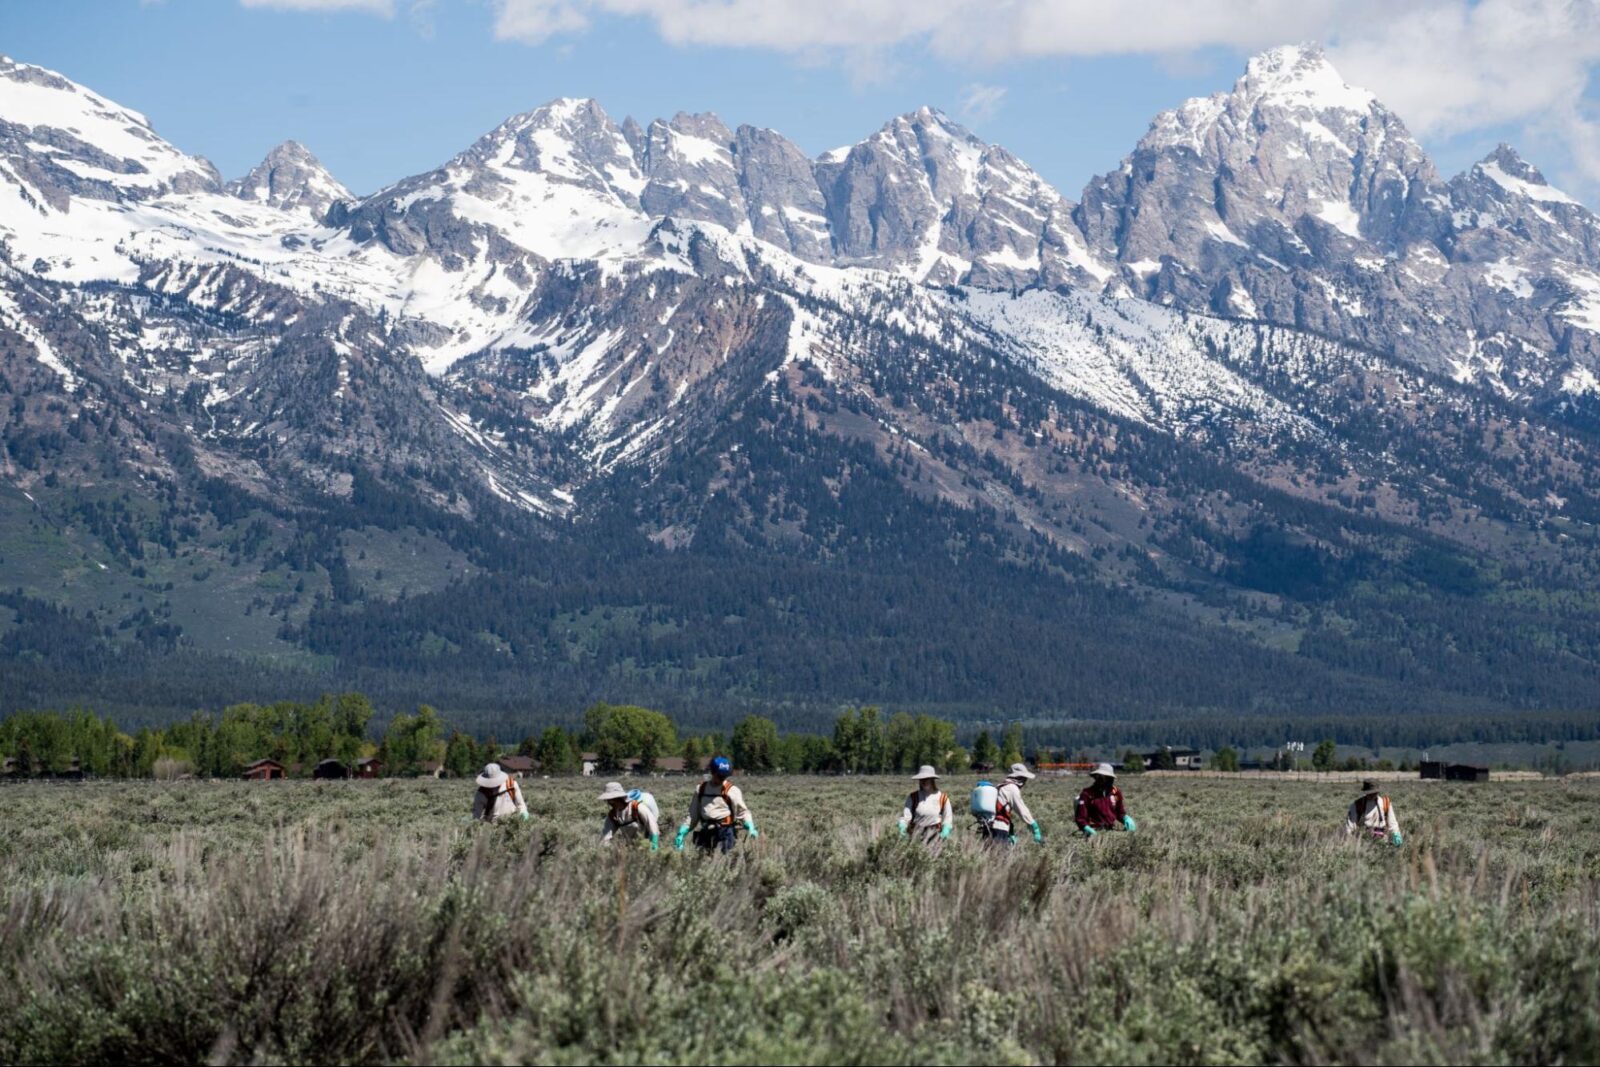 A Foundation funded youth crew work together in the sagebrush steppe with the Teton Range as their backdrop.